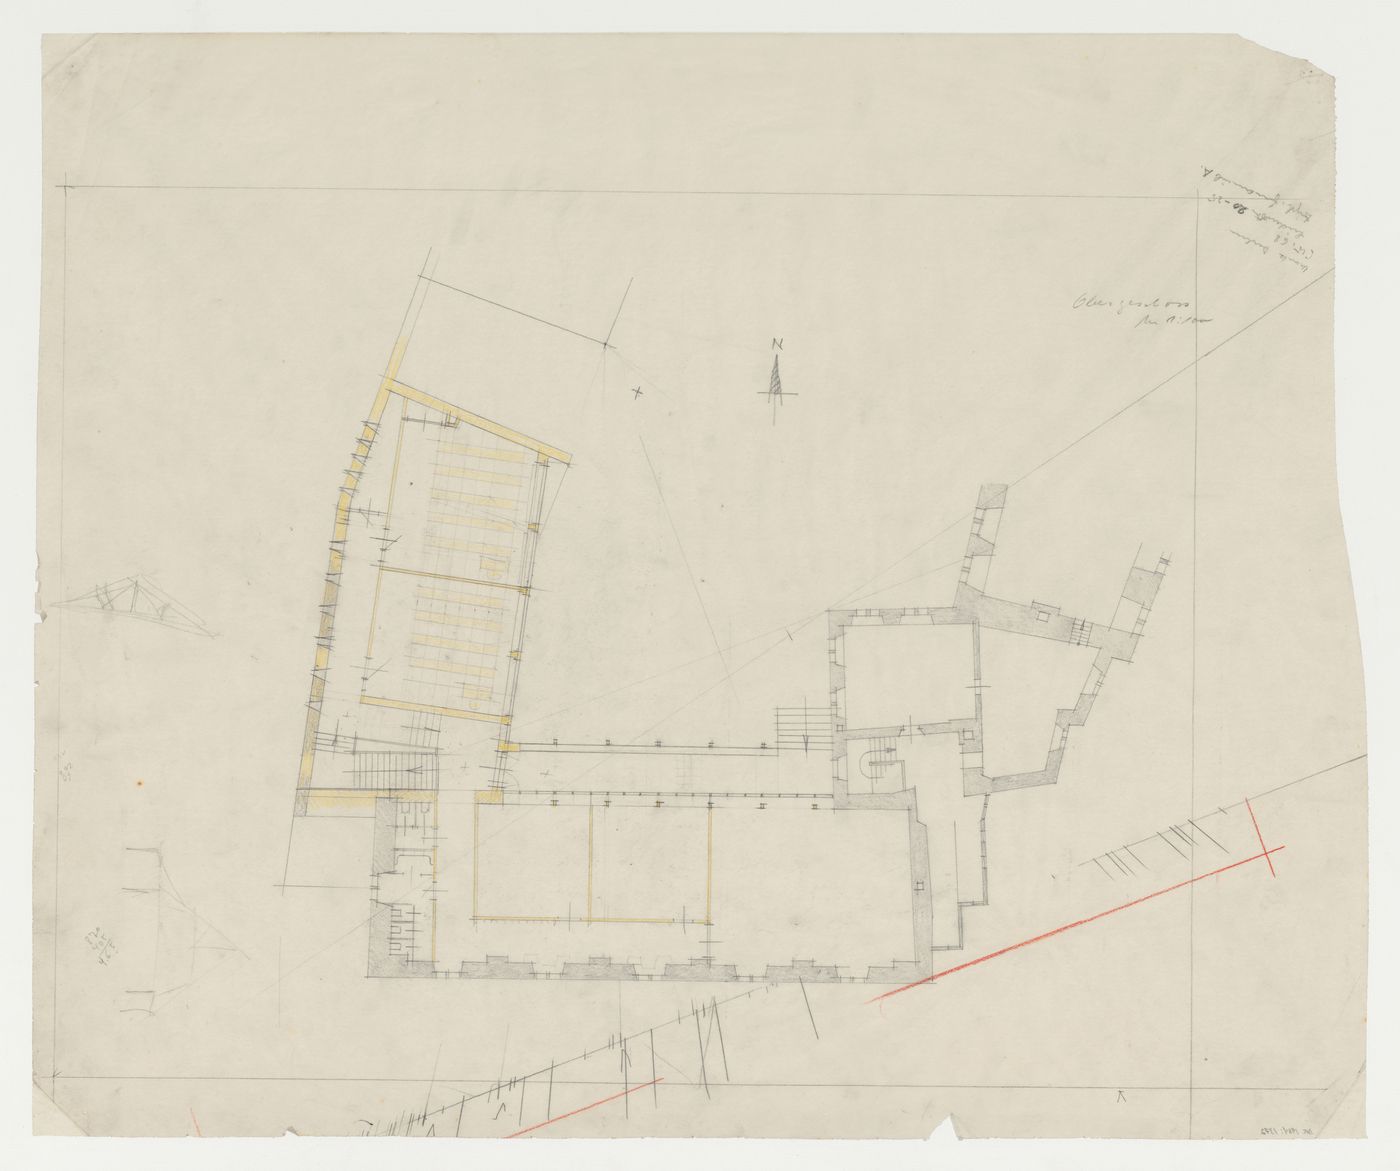 Plan for an addition to an existing building, possibly a school, Limburg an der Lahn, Germany